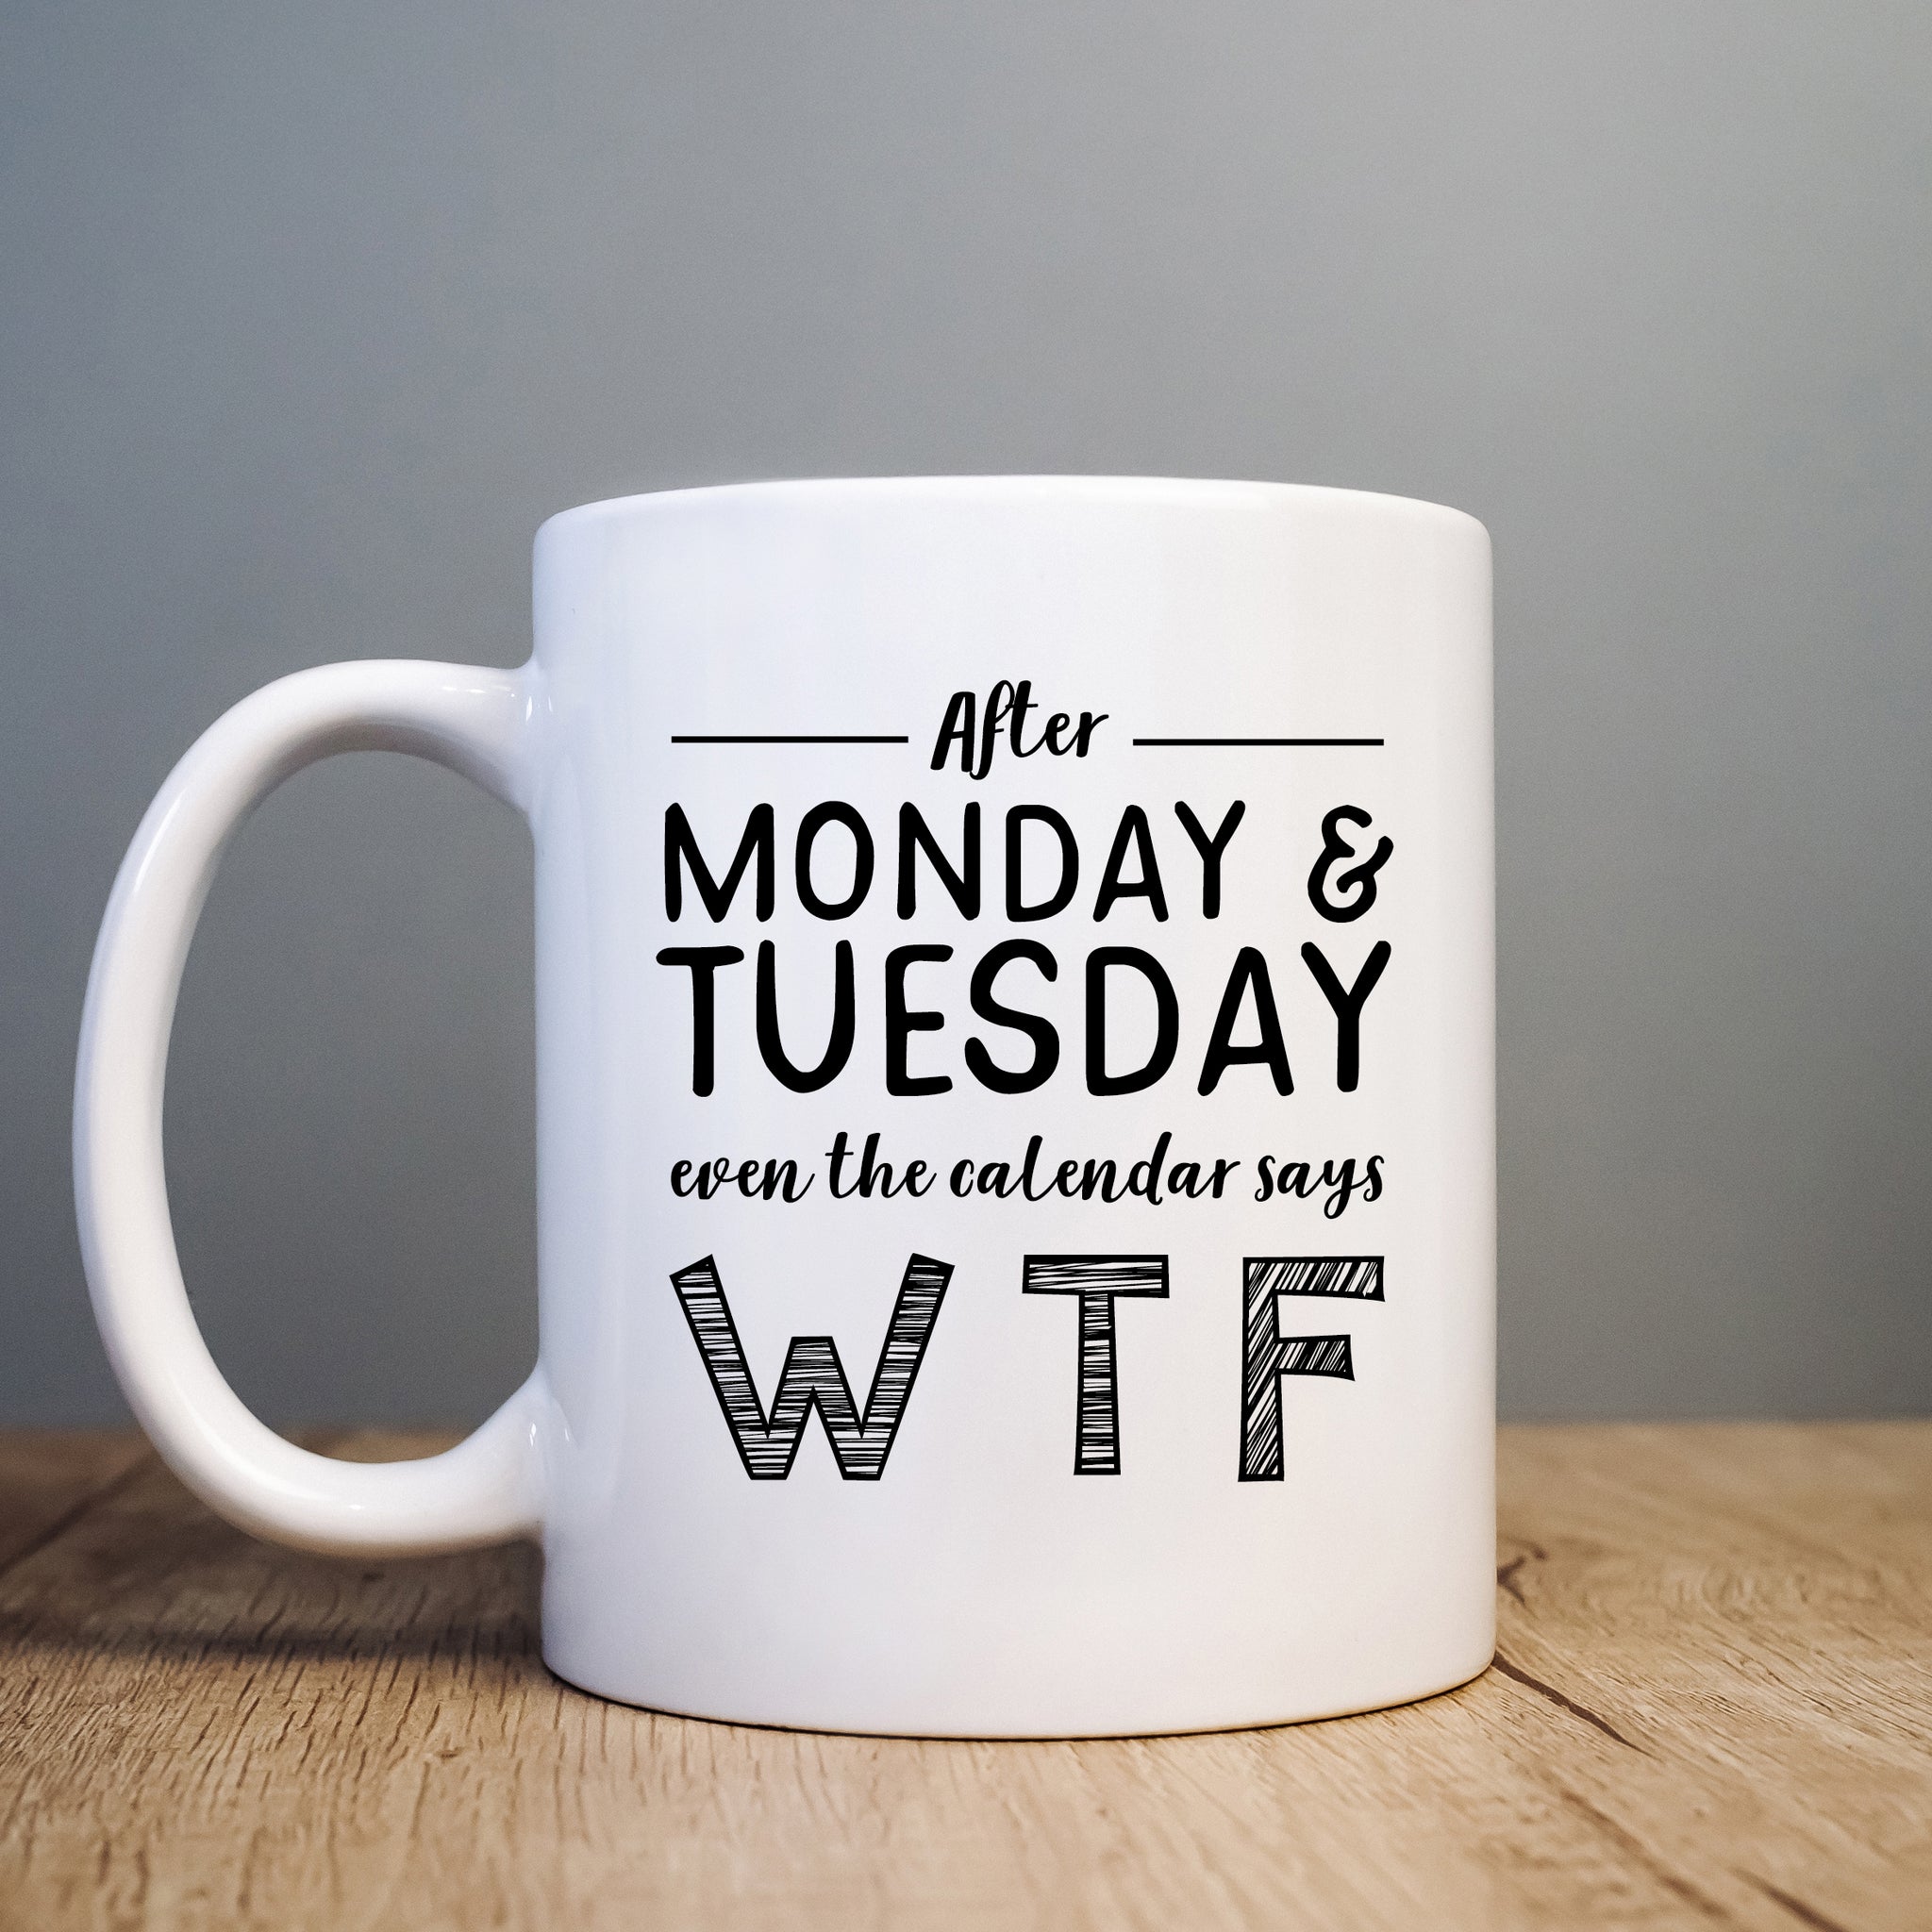 Colleague Mug, Even The Calendar Says WTF, Funny Gift Cup